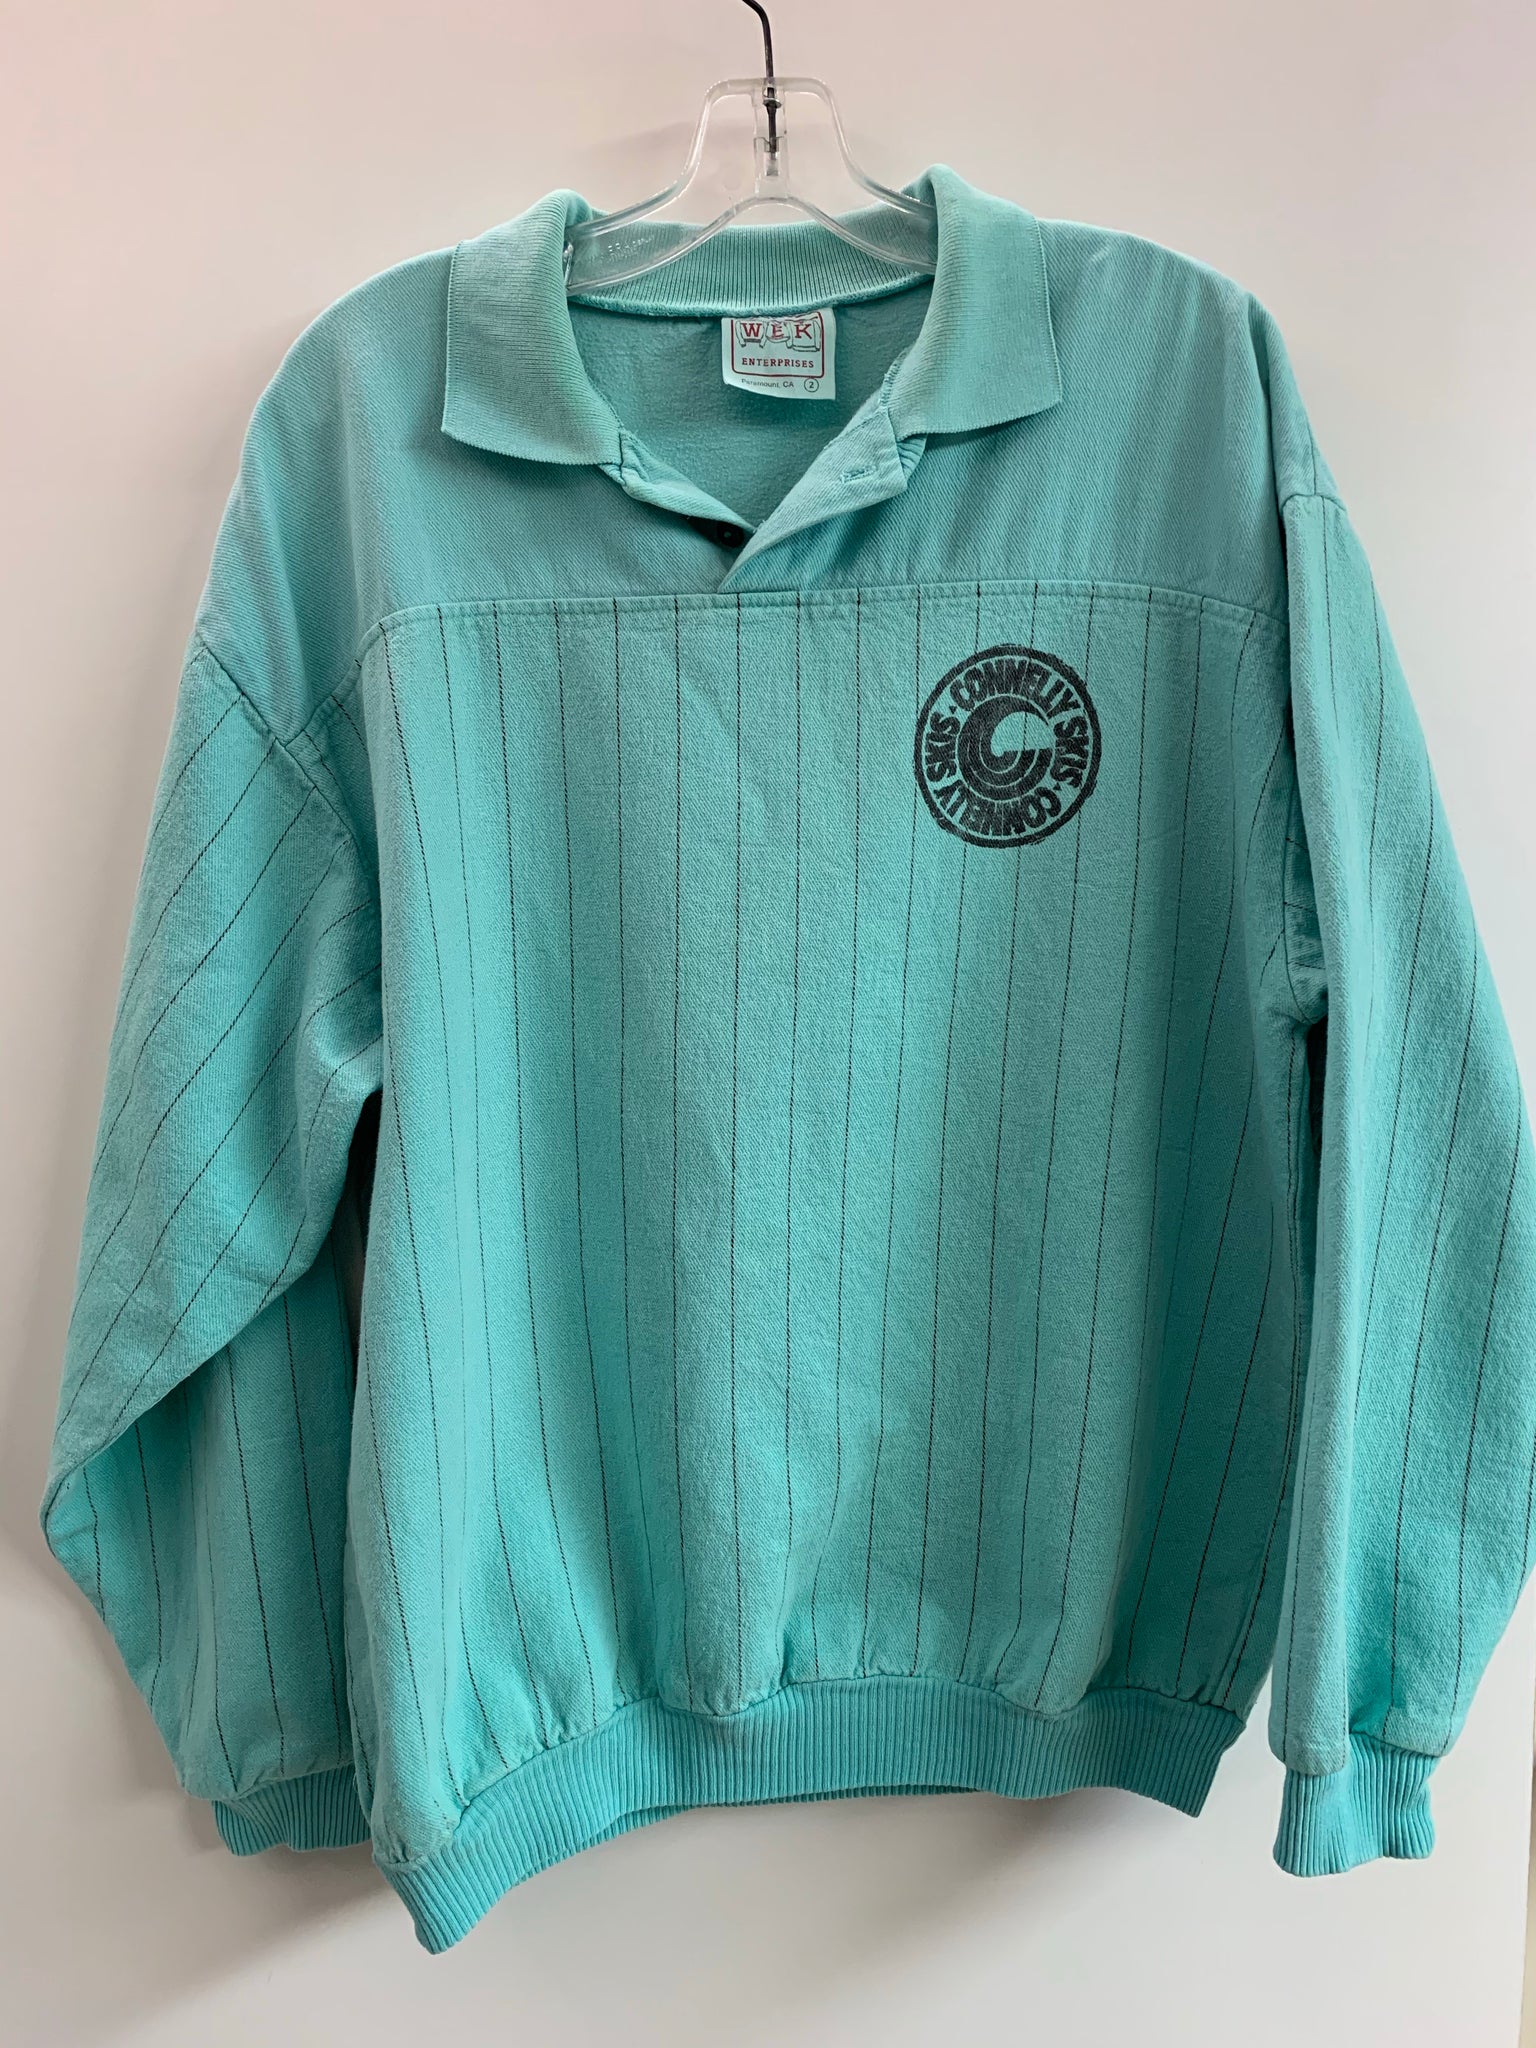 Connelly Skis 1990’s Teal Pullover